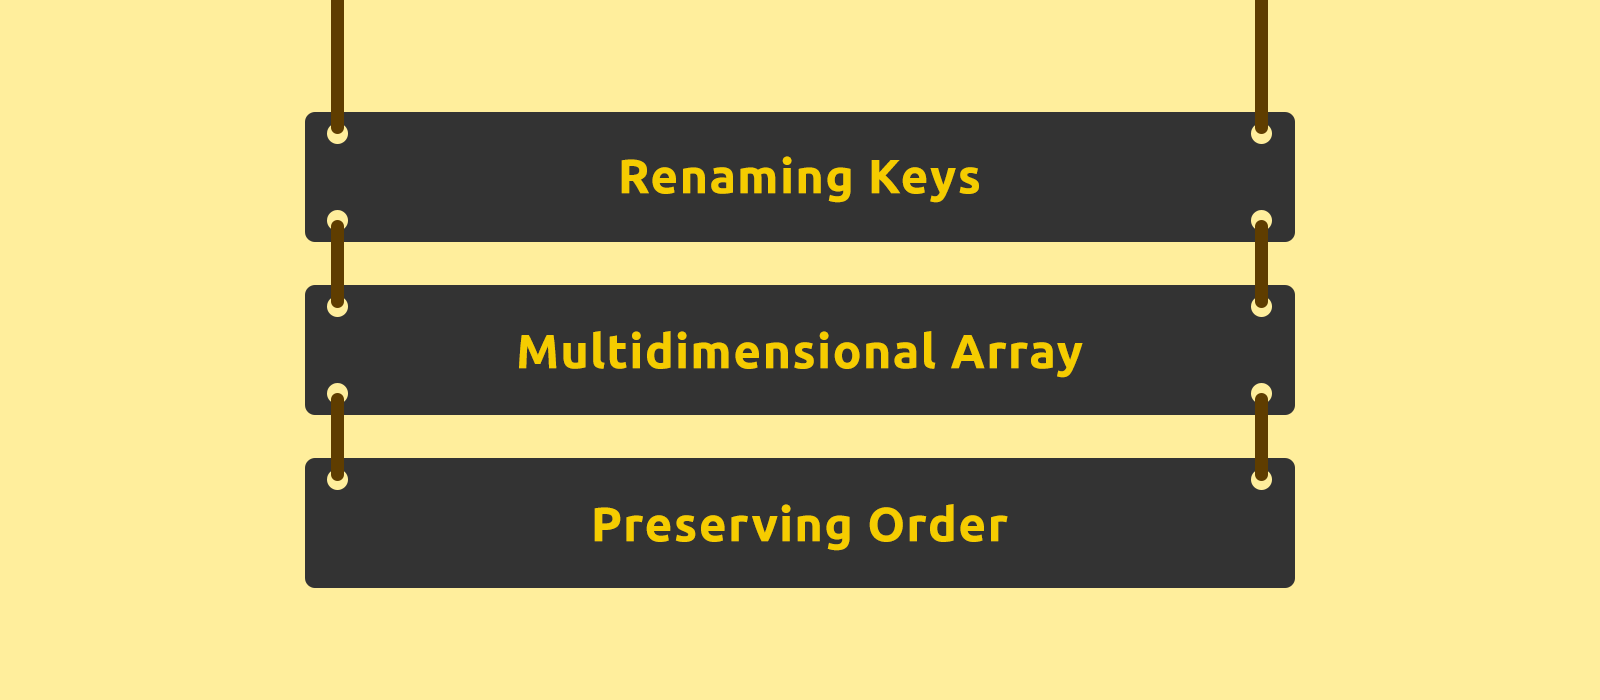 How to Rename the Keys of an Element of a Multidimensional Associative Array While Preserving Elements' Order